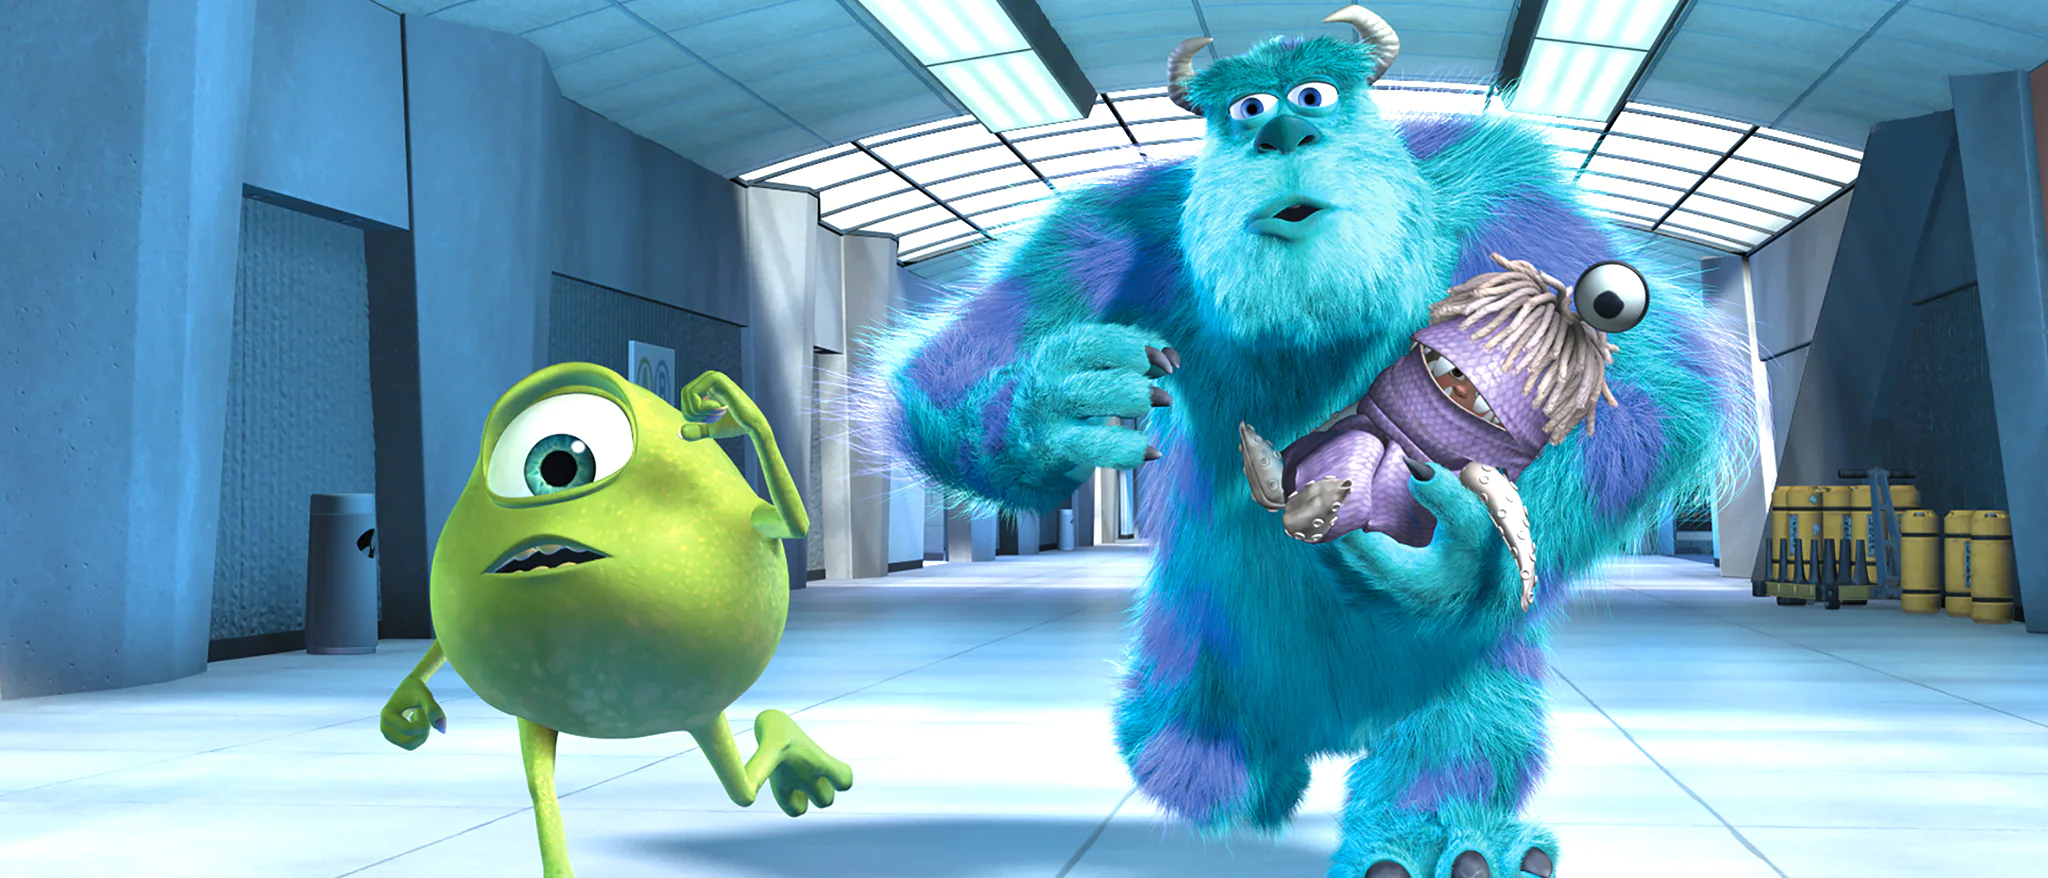 Despite this, Sullivan - Blue Monster from Monsters Inc has a strong commitment to the people he loves